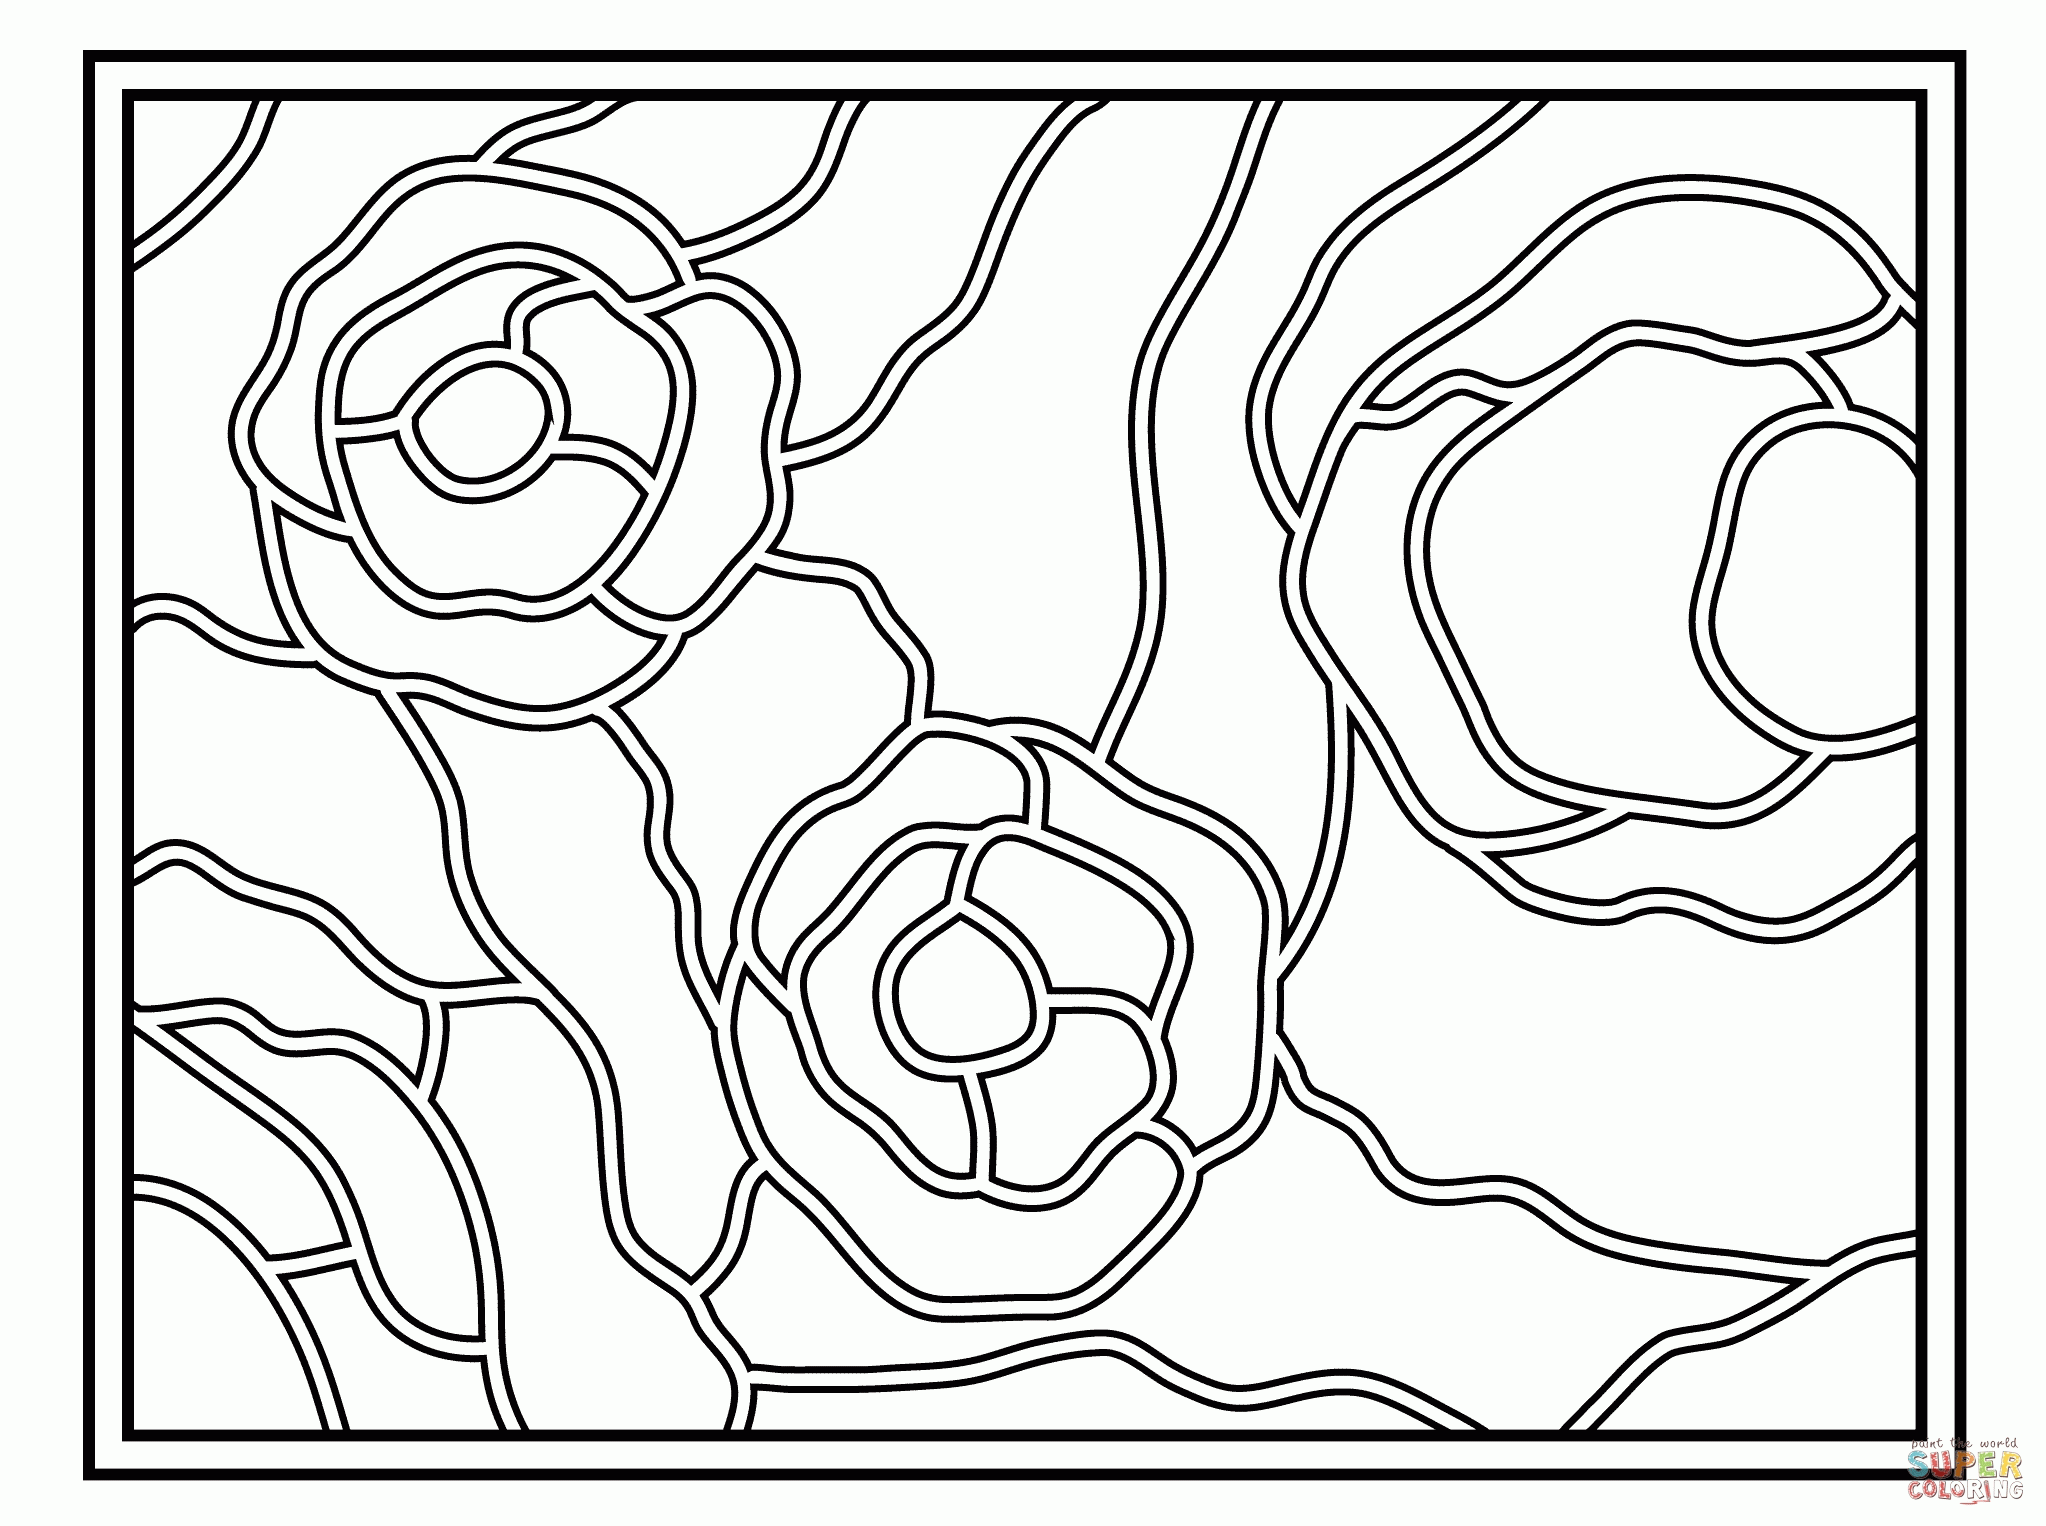 Guide Starry Night Stained Glass Coloring Page Free Printable ...